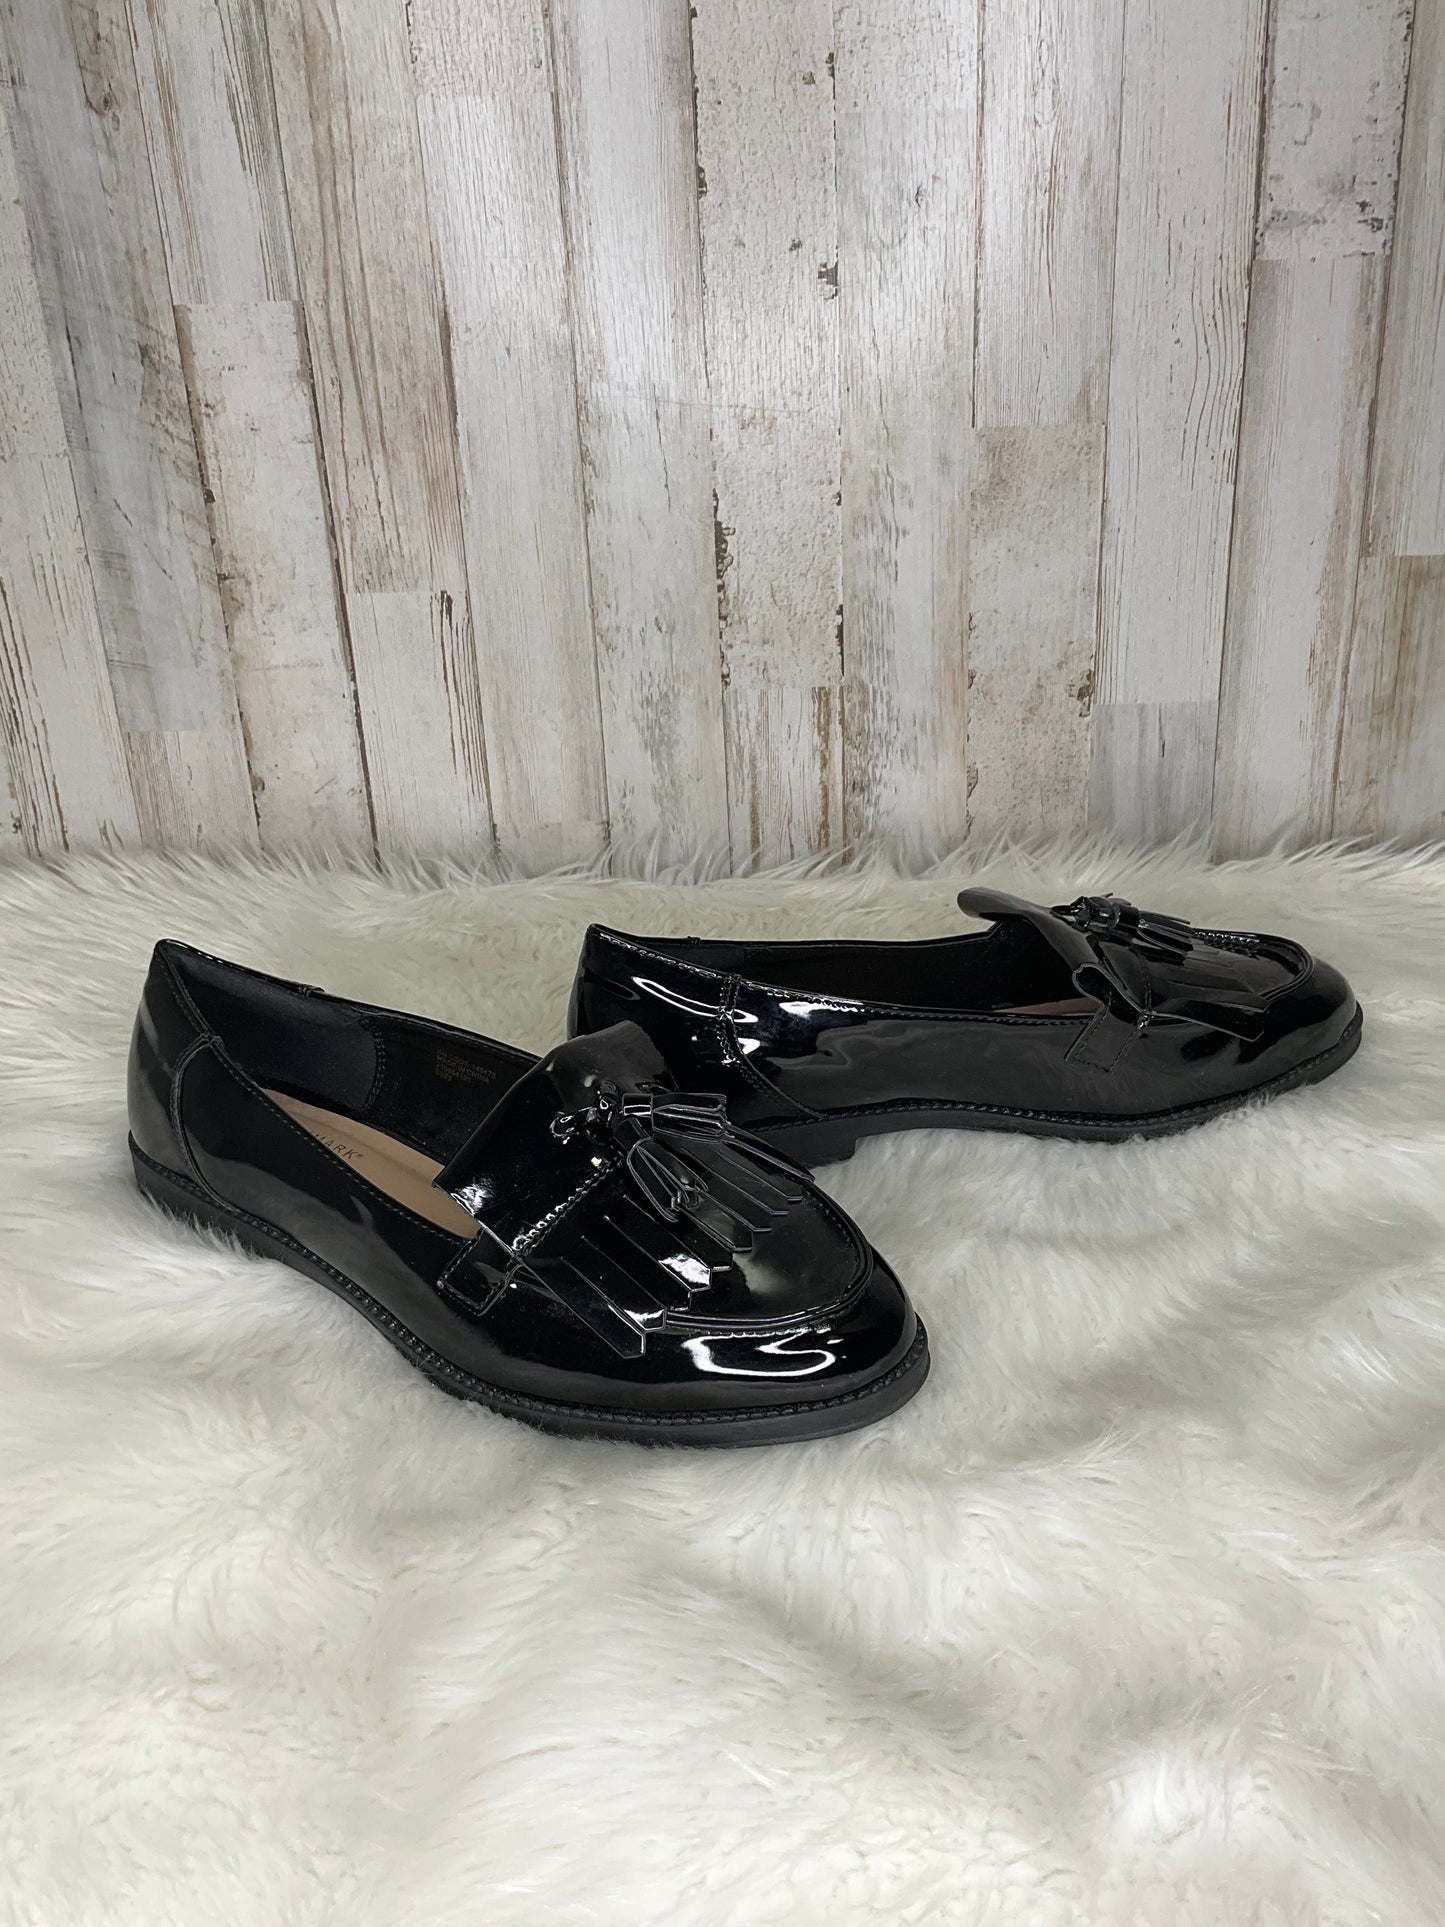 Shoes Flats Loafer Oxford By Primark  Size: 11